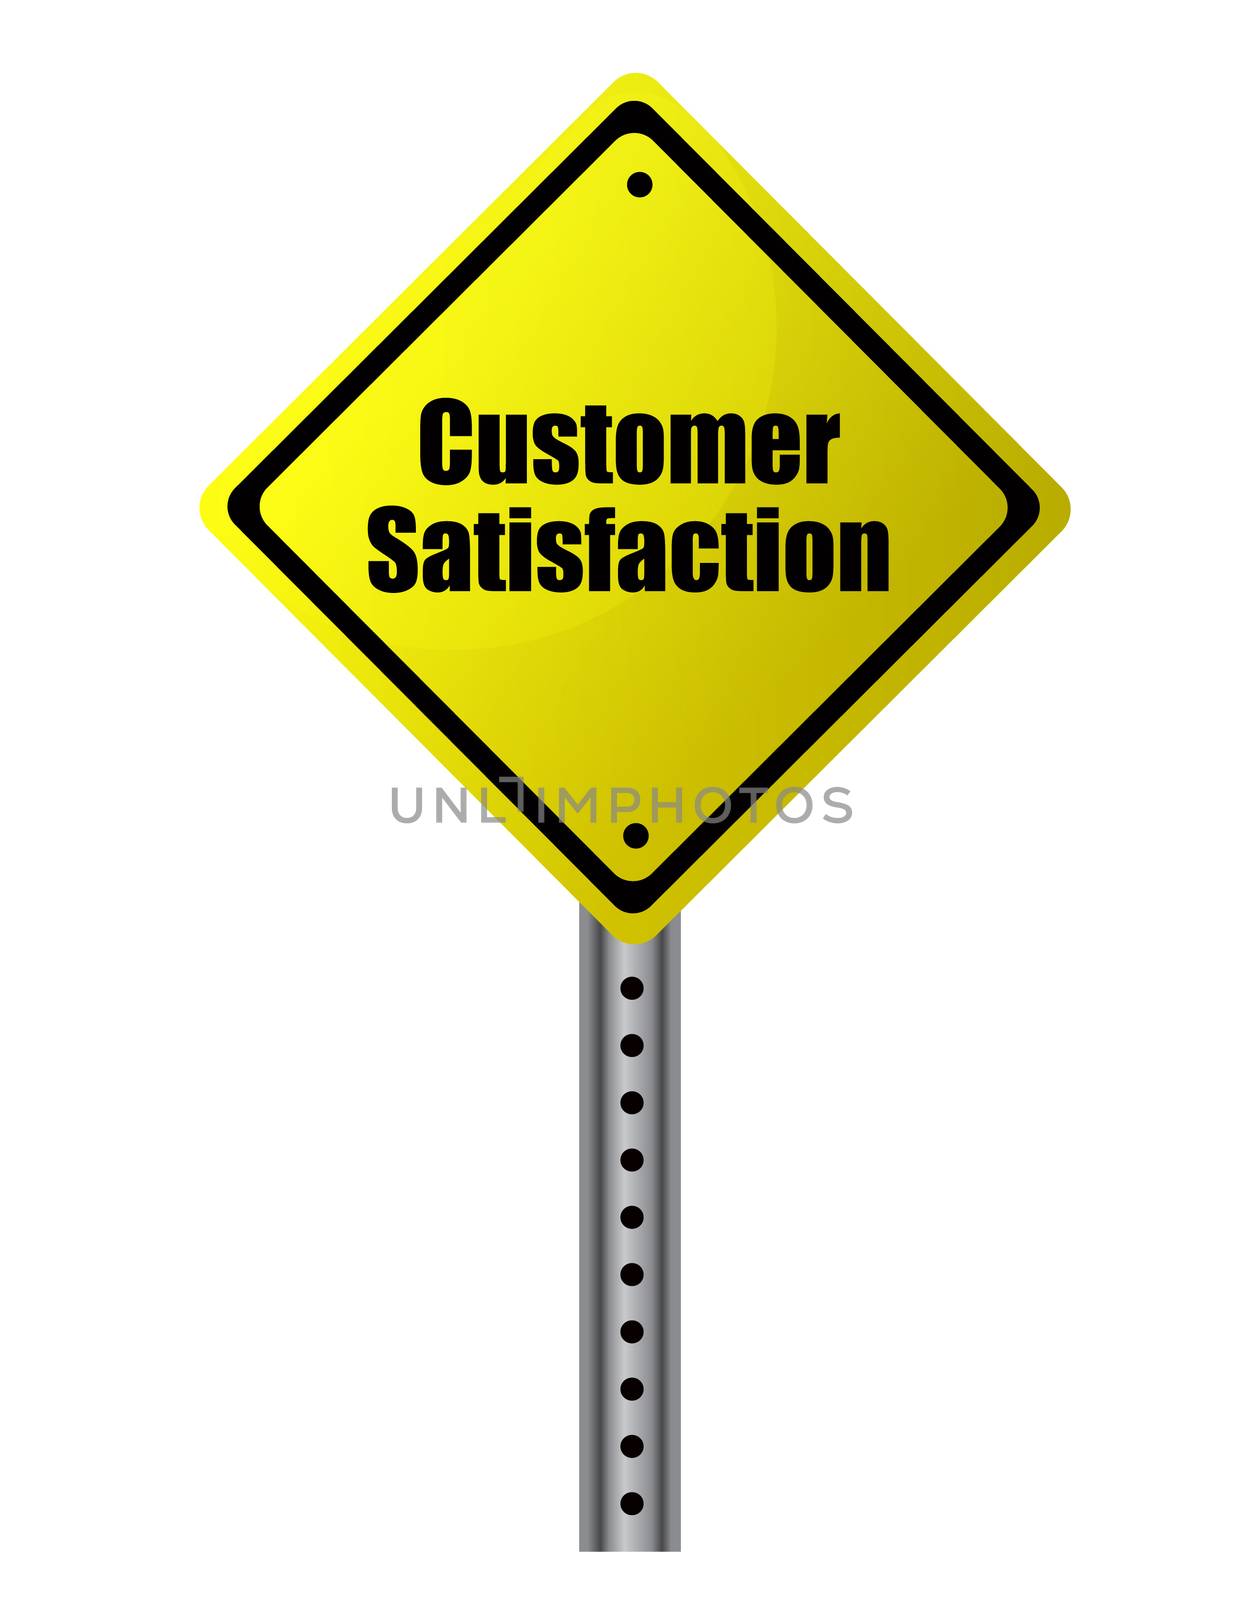 Customer satisfaction posted on a yellow sign. Vector file available